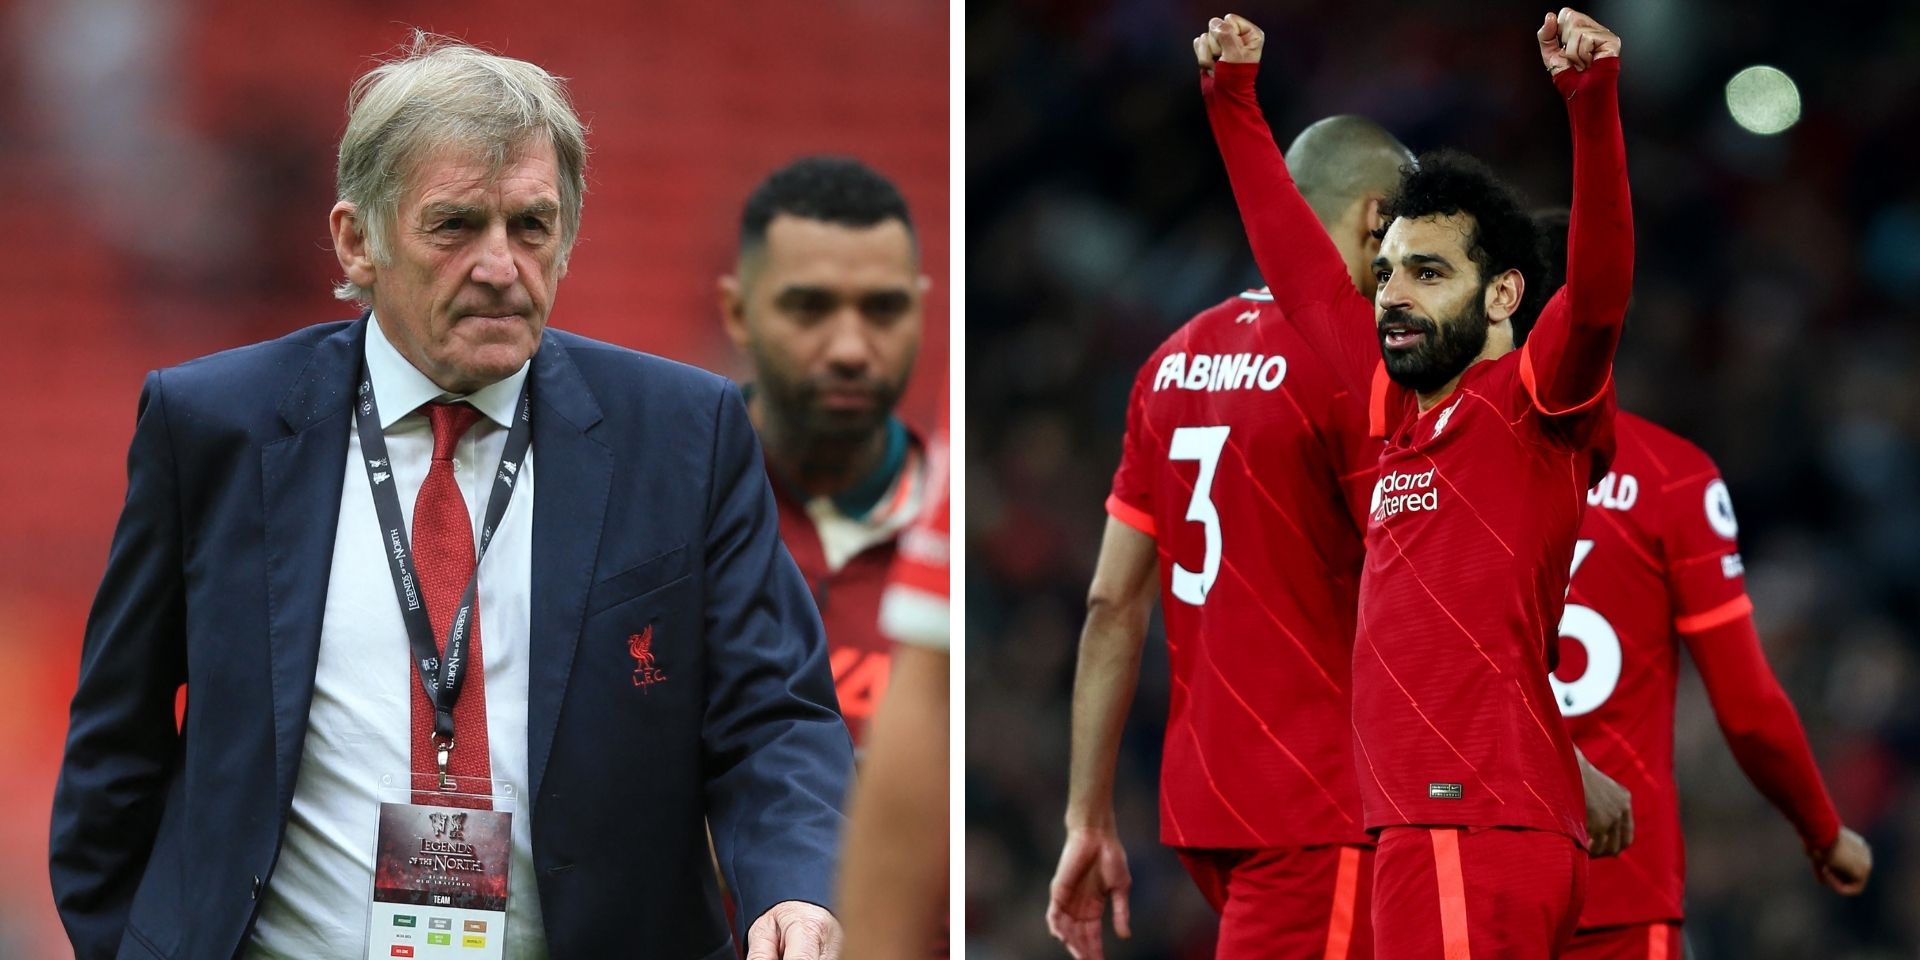 ‘Thank you Mo’ – Sir Kenny Dalglish on Mo Salah’s decision to extend his contract at Liverpool